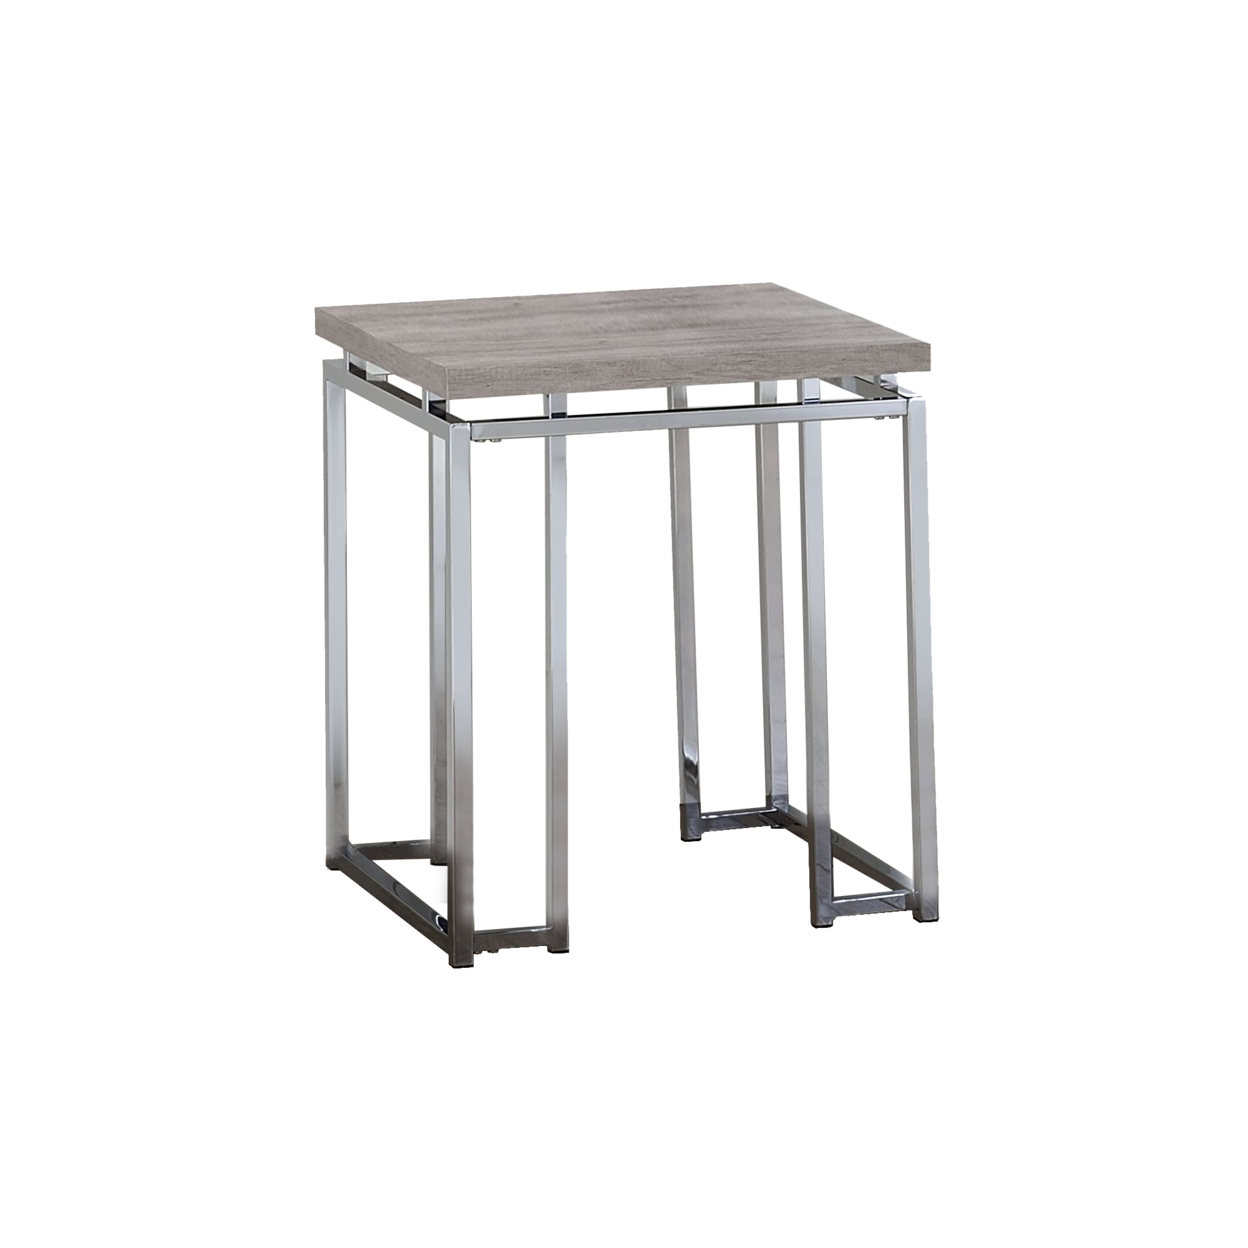 End Table With Rectangular Tabletop And Metal Legs, Silver And Brown- Saltoro Sherpi